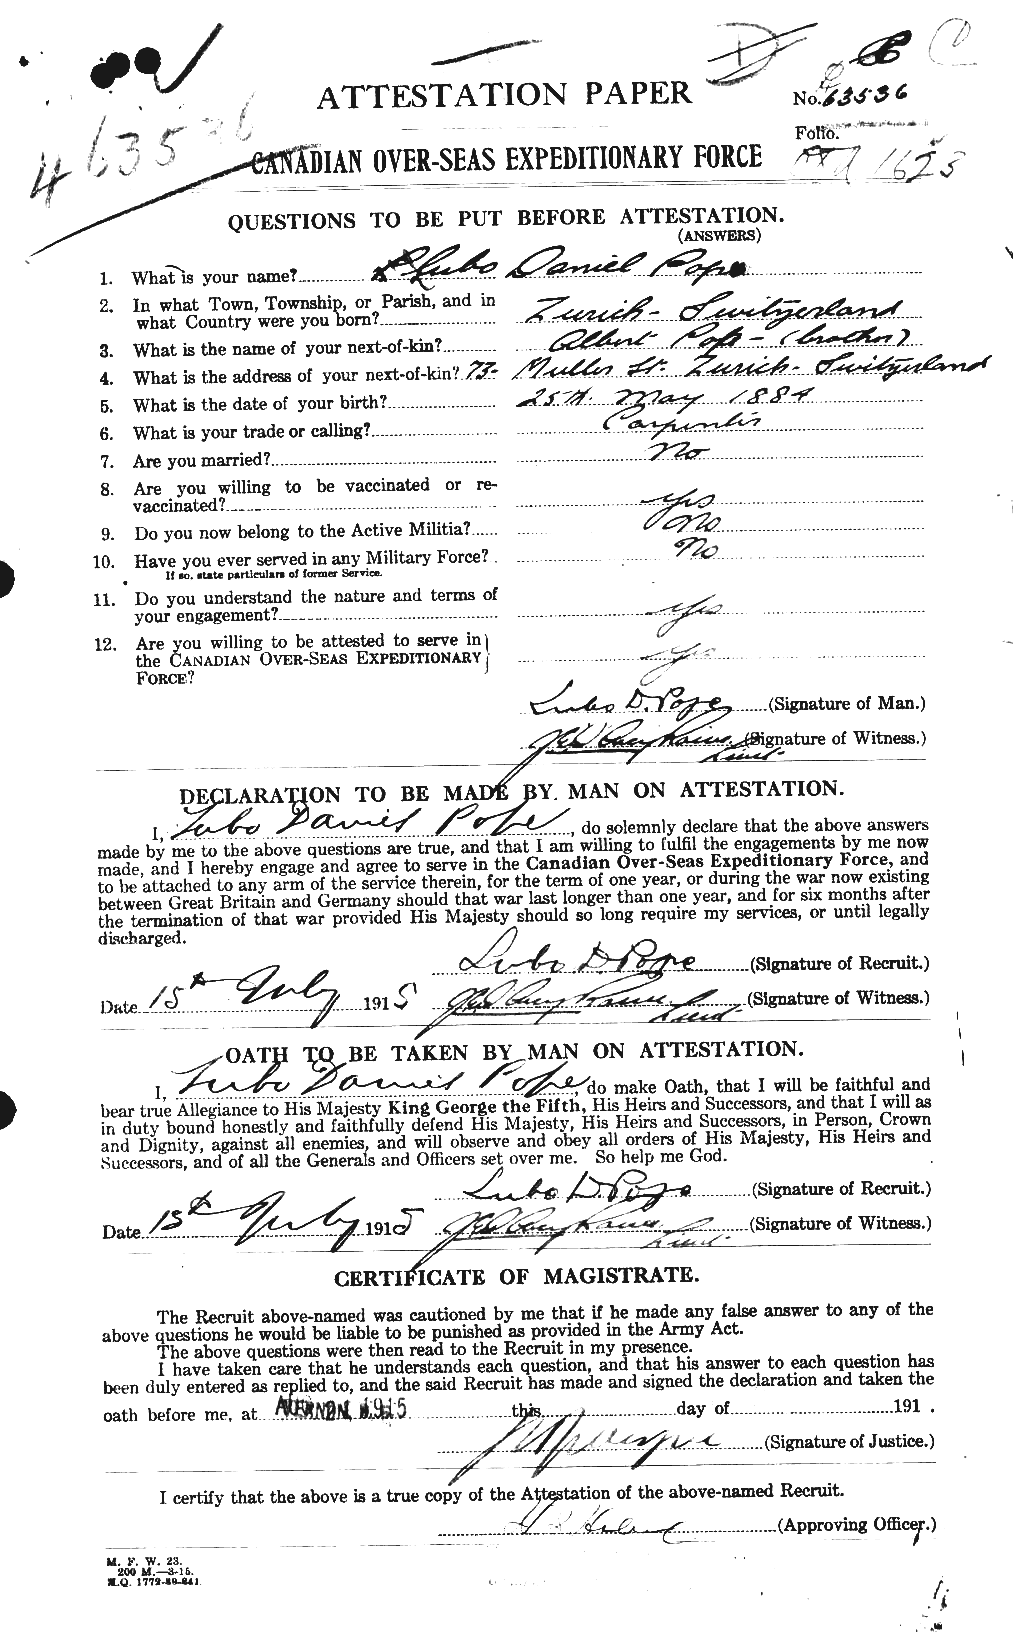 Personnel Records of the First World War - CEF 581454a